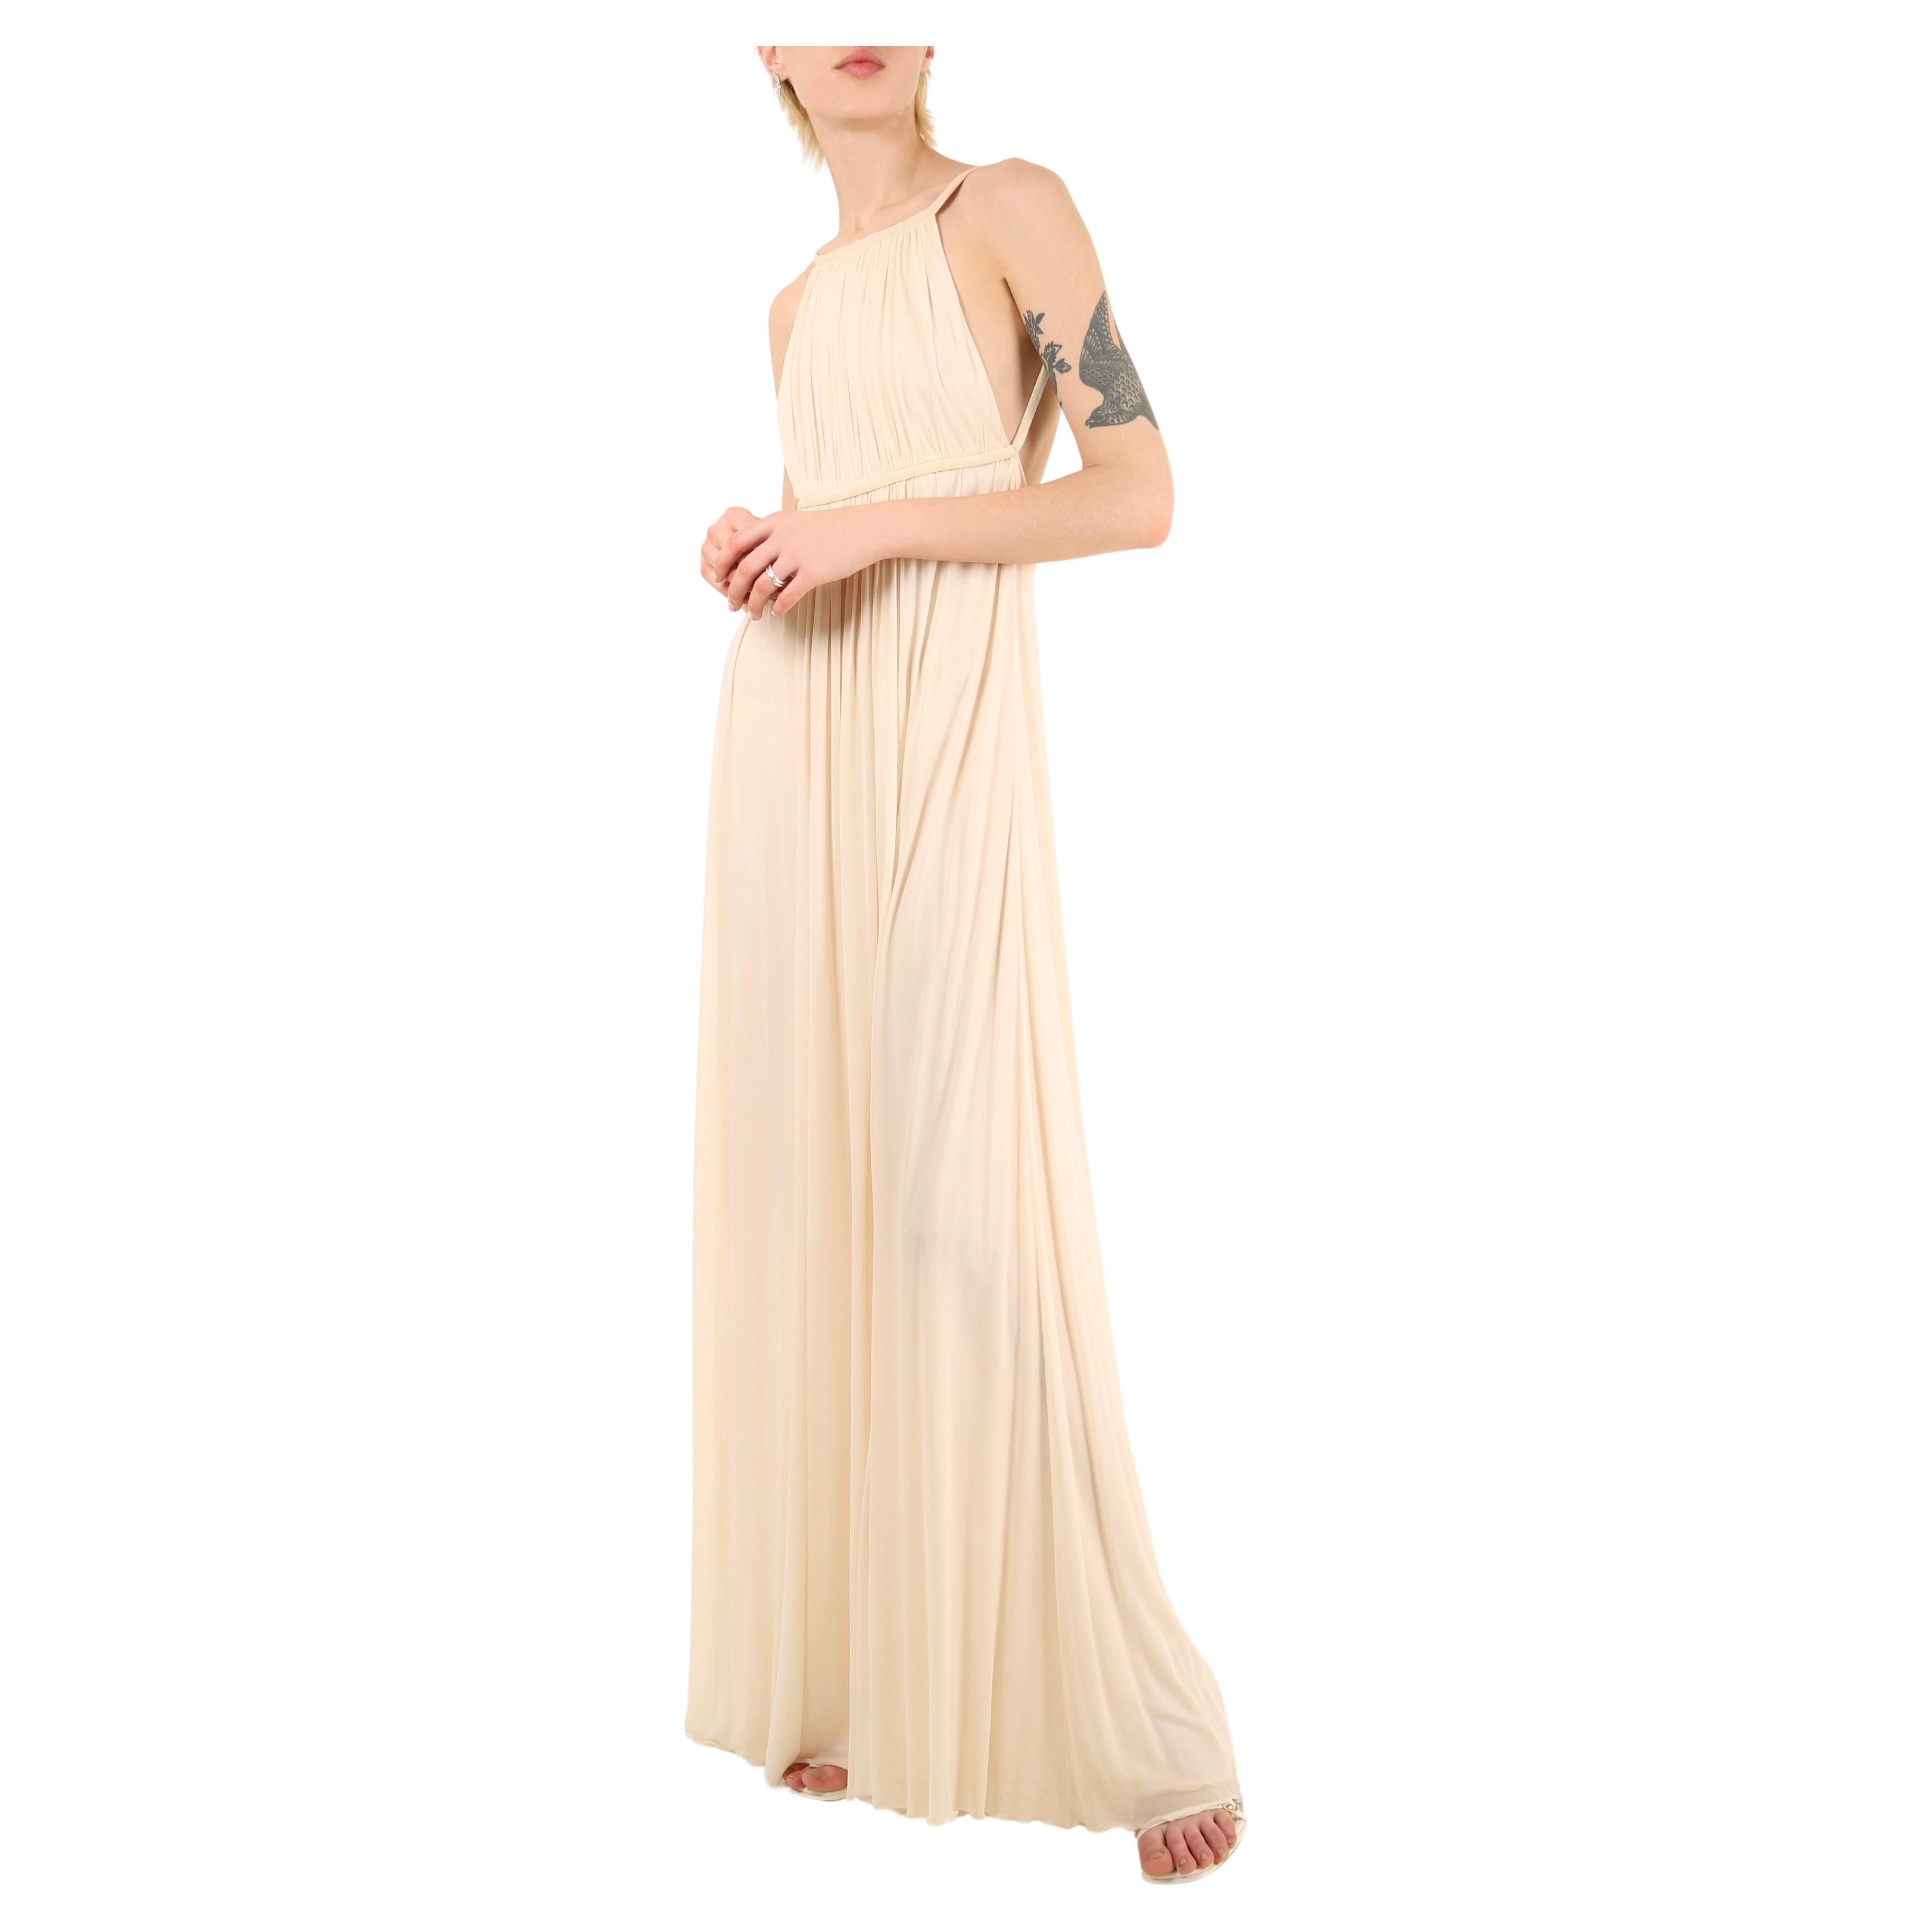 Halston 09 ivory cream plisse grecian style backless wedding maxi dress gown 42 For Sale